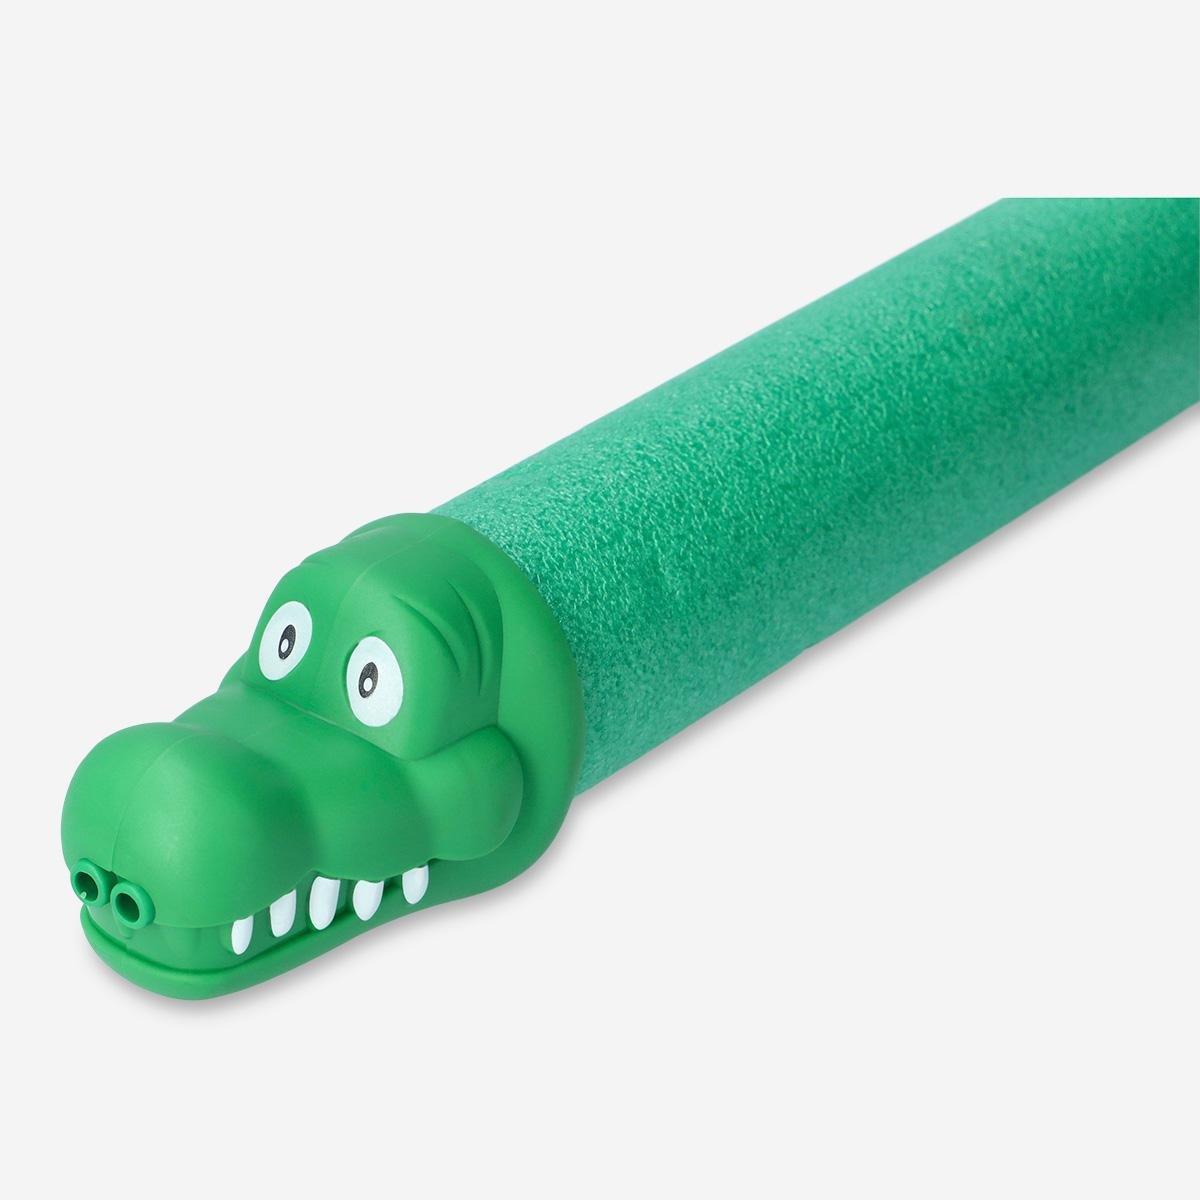 Green water pump toy